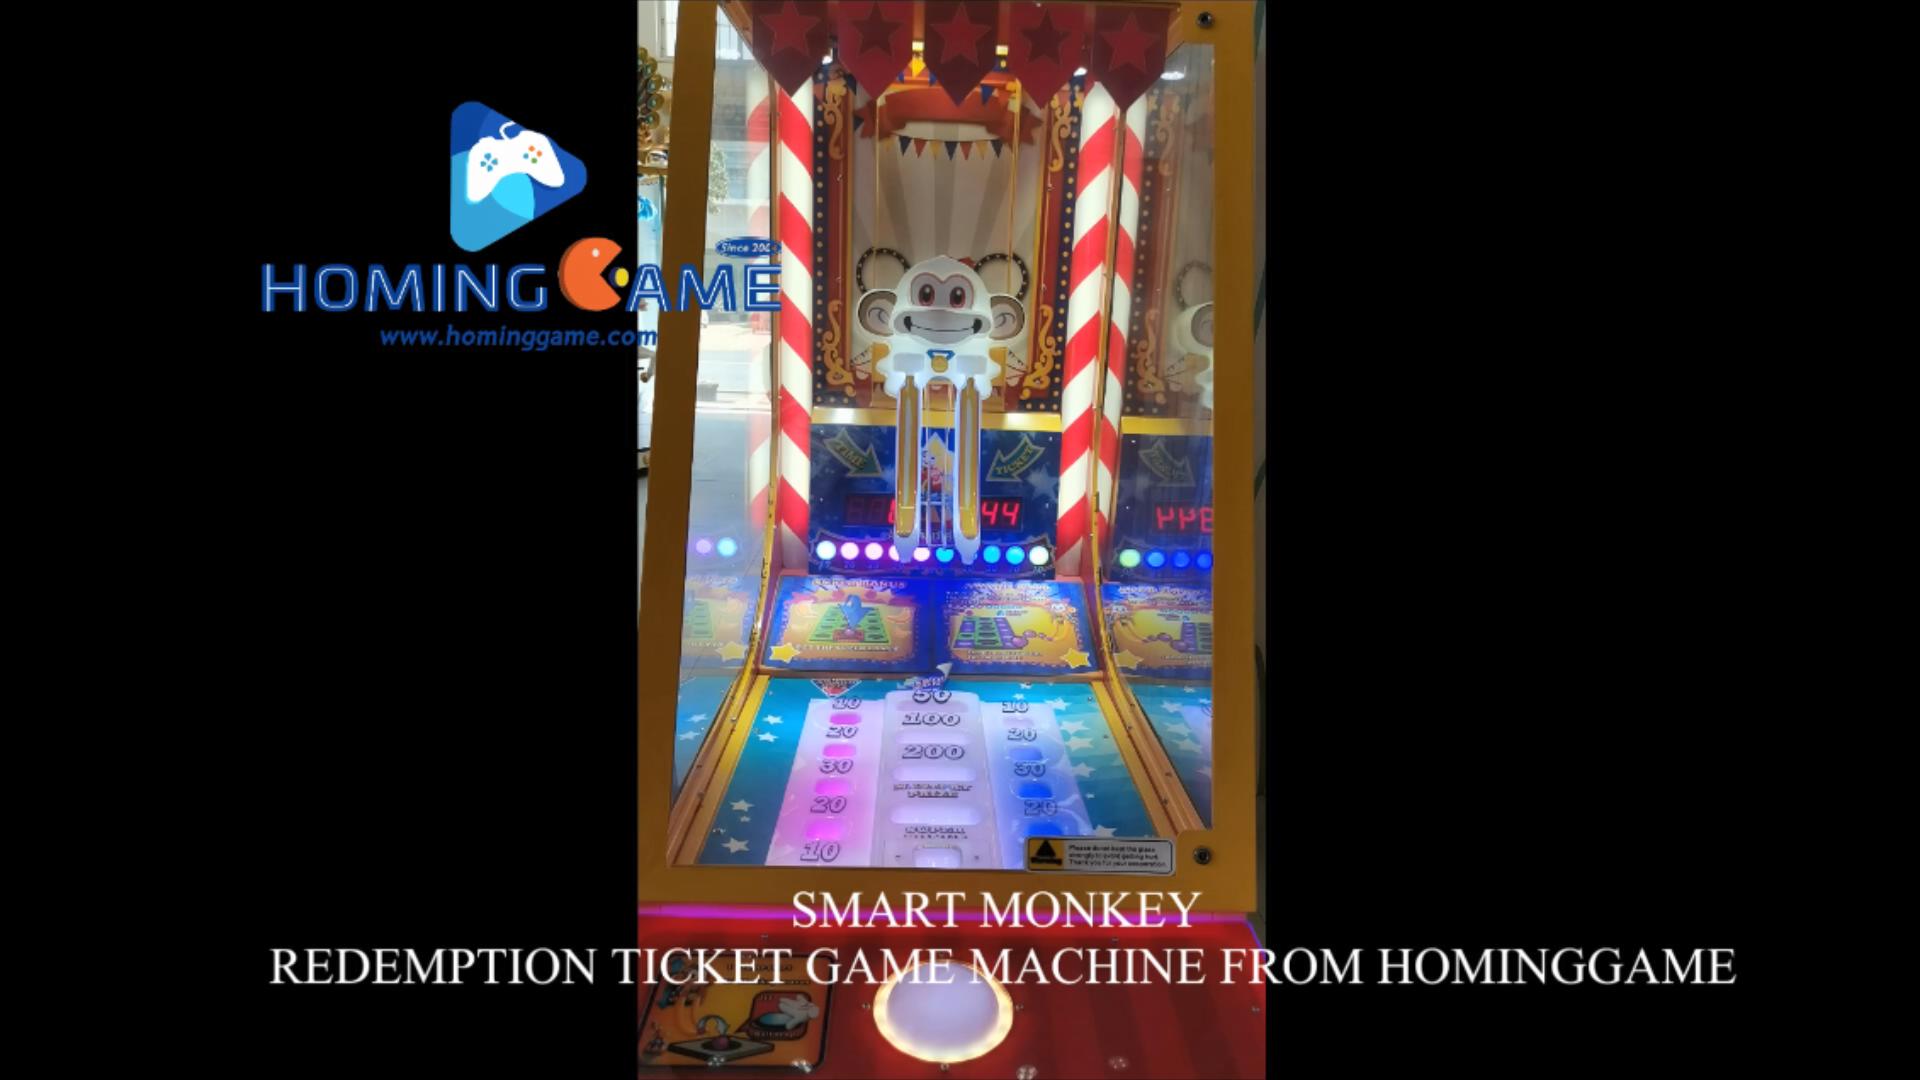 Funny Coin Operated Redemption ticket game machine Smart Monkey Kids Lottery Arcade Game Machine From HomingGame(Order call whatsapp:+8618688409495),smart monkey lottery game machine,smart monkey kids lottery game machine,smart monkey redemption game machine,redemption game machine,game machine,arcade game machine,coin operated game machine,indoor game machine,kids game machine,redemption ticket game machine,amsuement machine,amsuement park game equipment,game equipment,hominggame,www.gametube.hk,entertainment game machine,family entertainment game machine,kids game center game machine,arcade game machine for sale,amusement machine,amsuement park game,arcade games